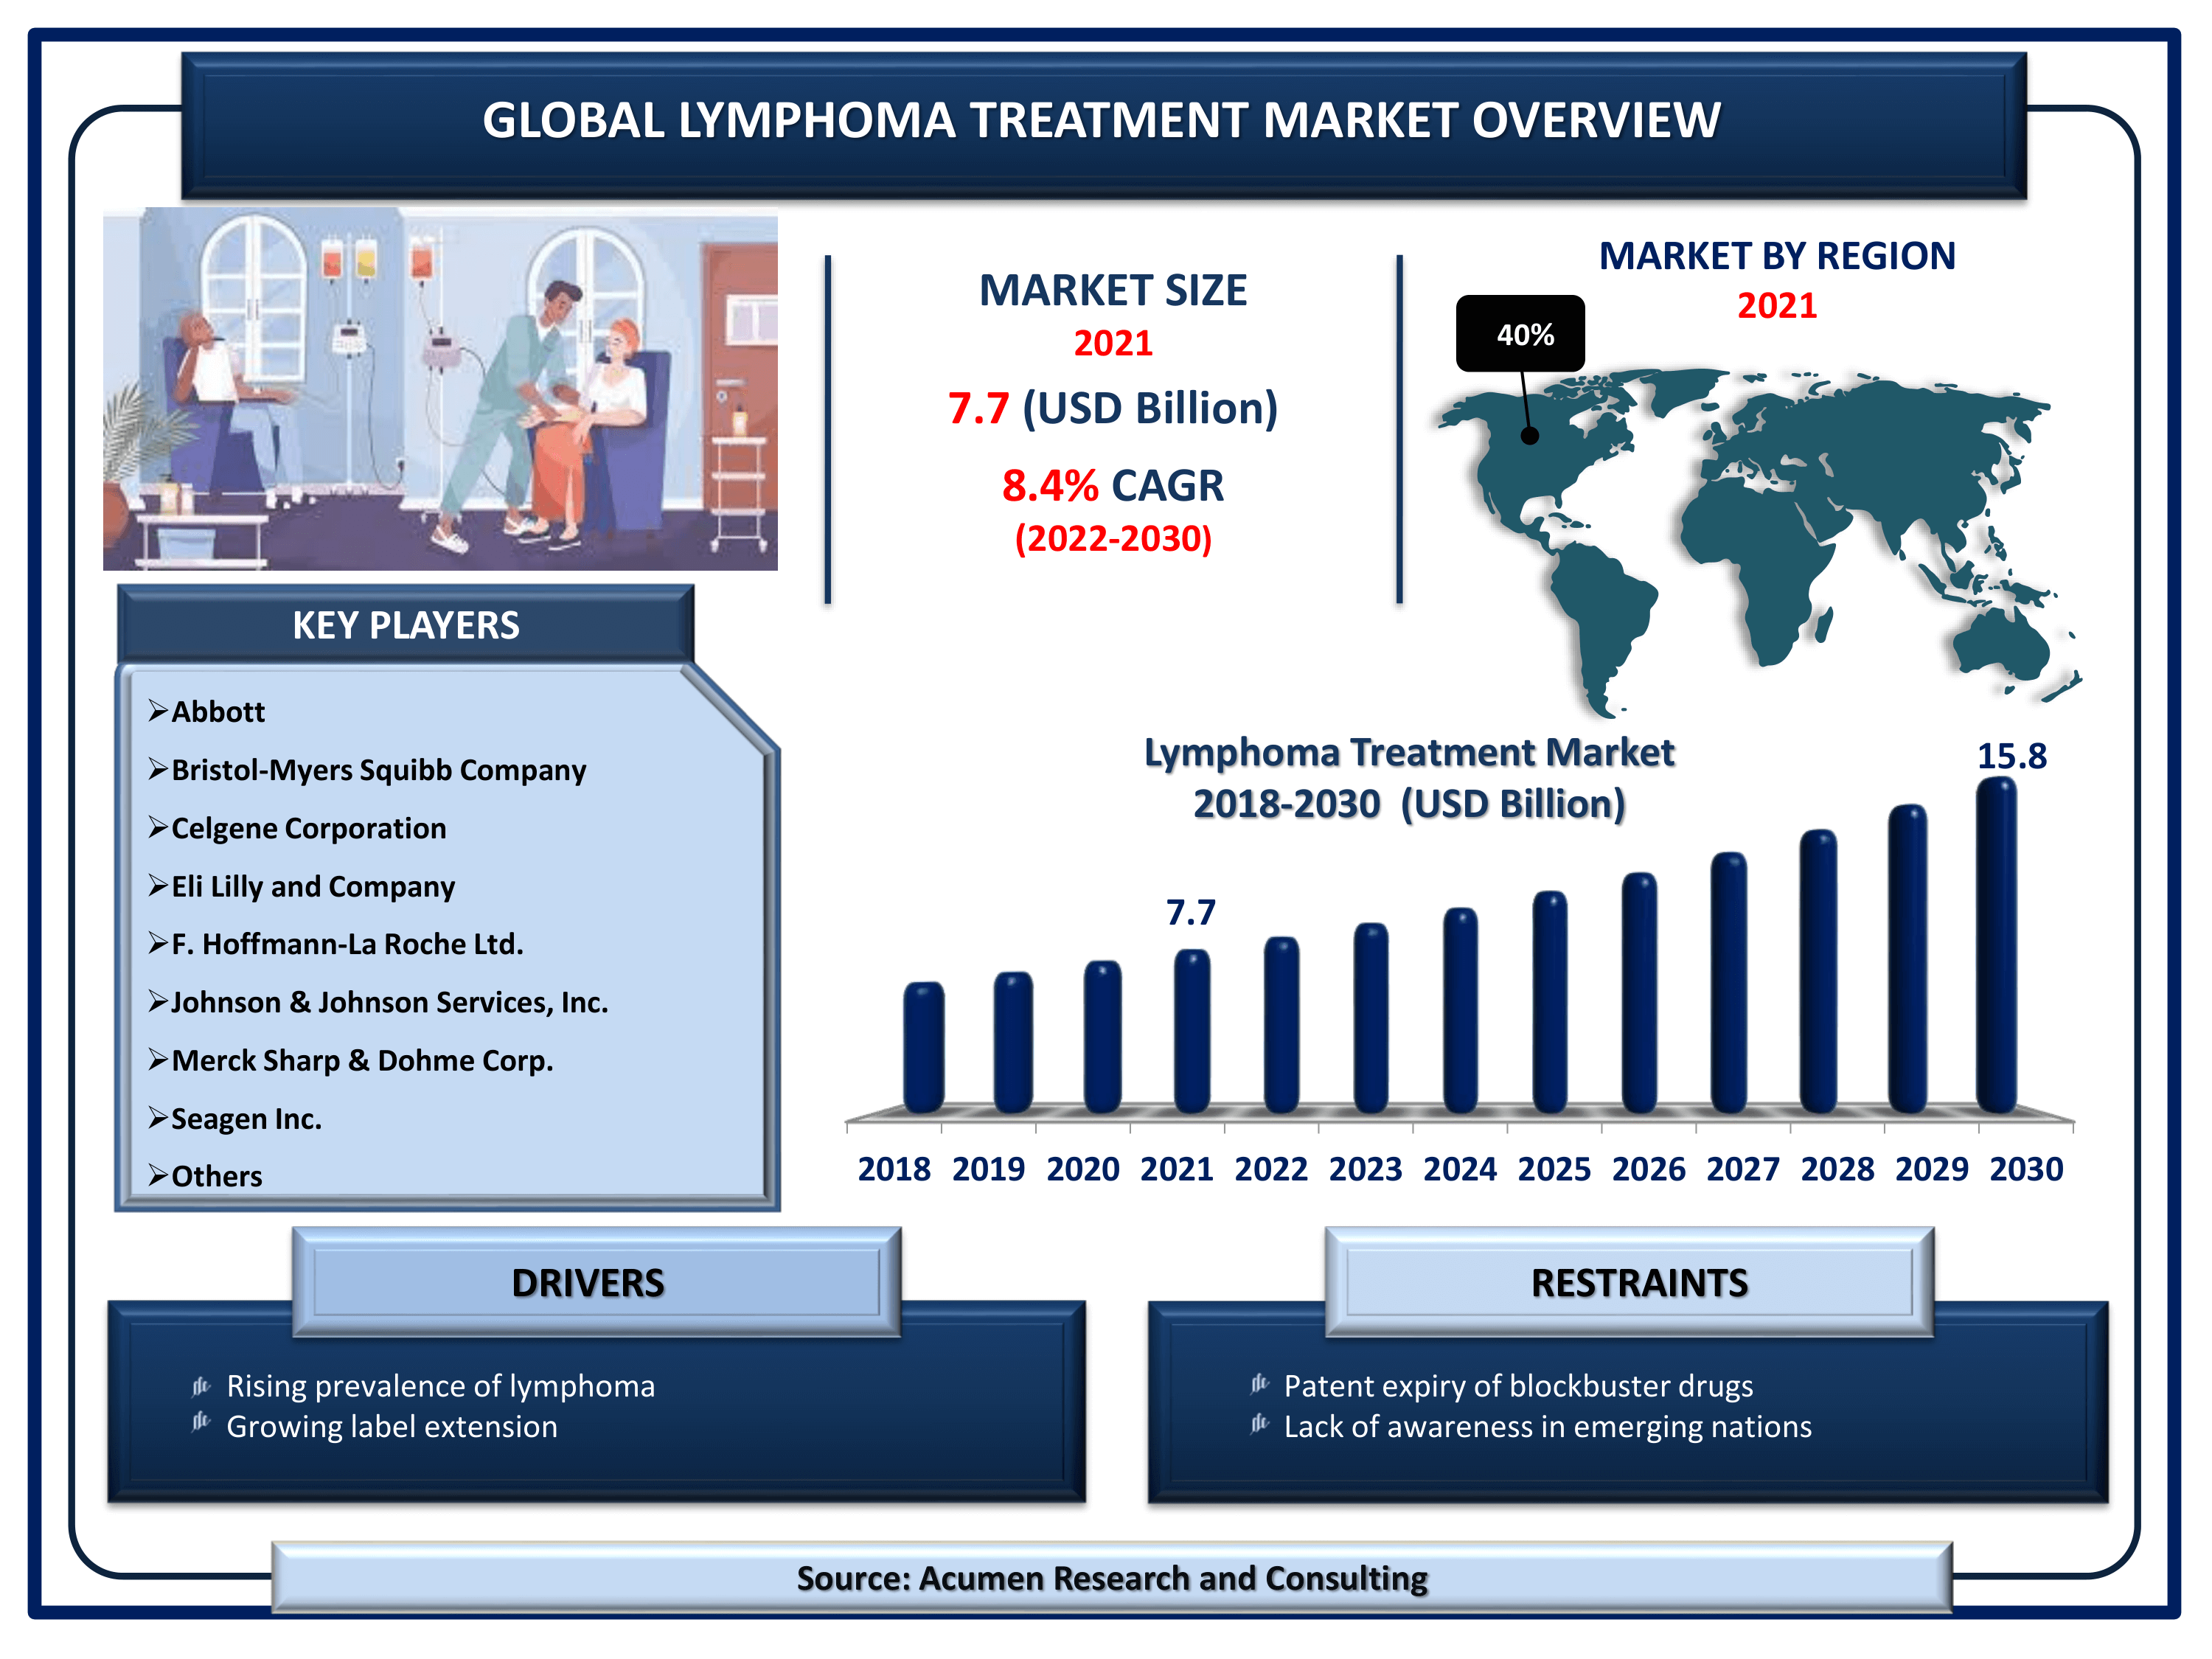 Global lymphoma treatment market revenue is estimated to reach USD 15.8 Billion by 2030 with a CAGR of 8.4% from 2022 to 2030